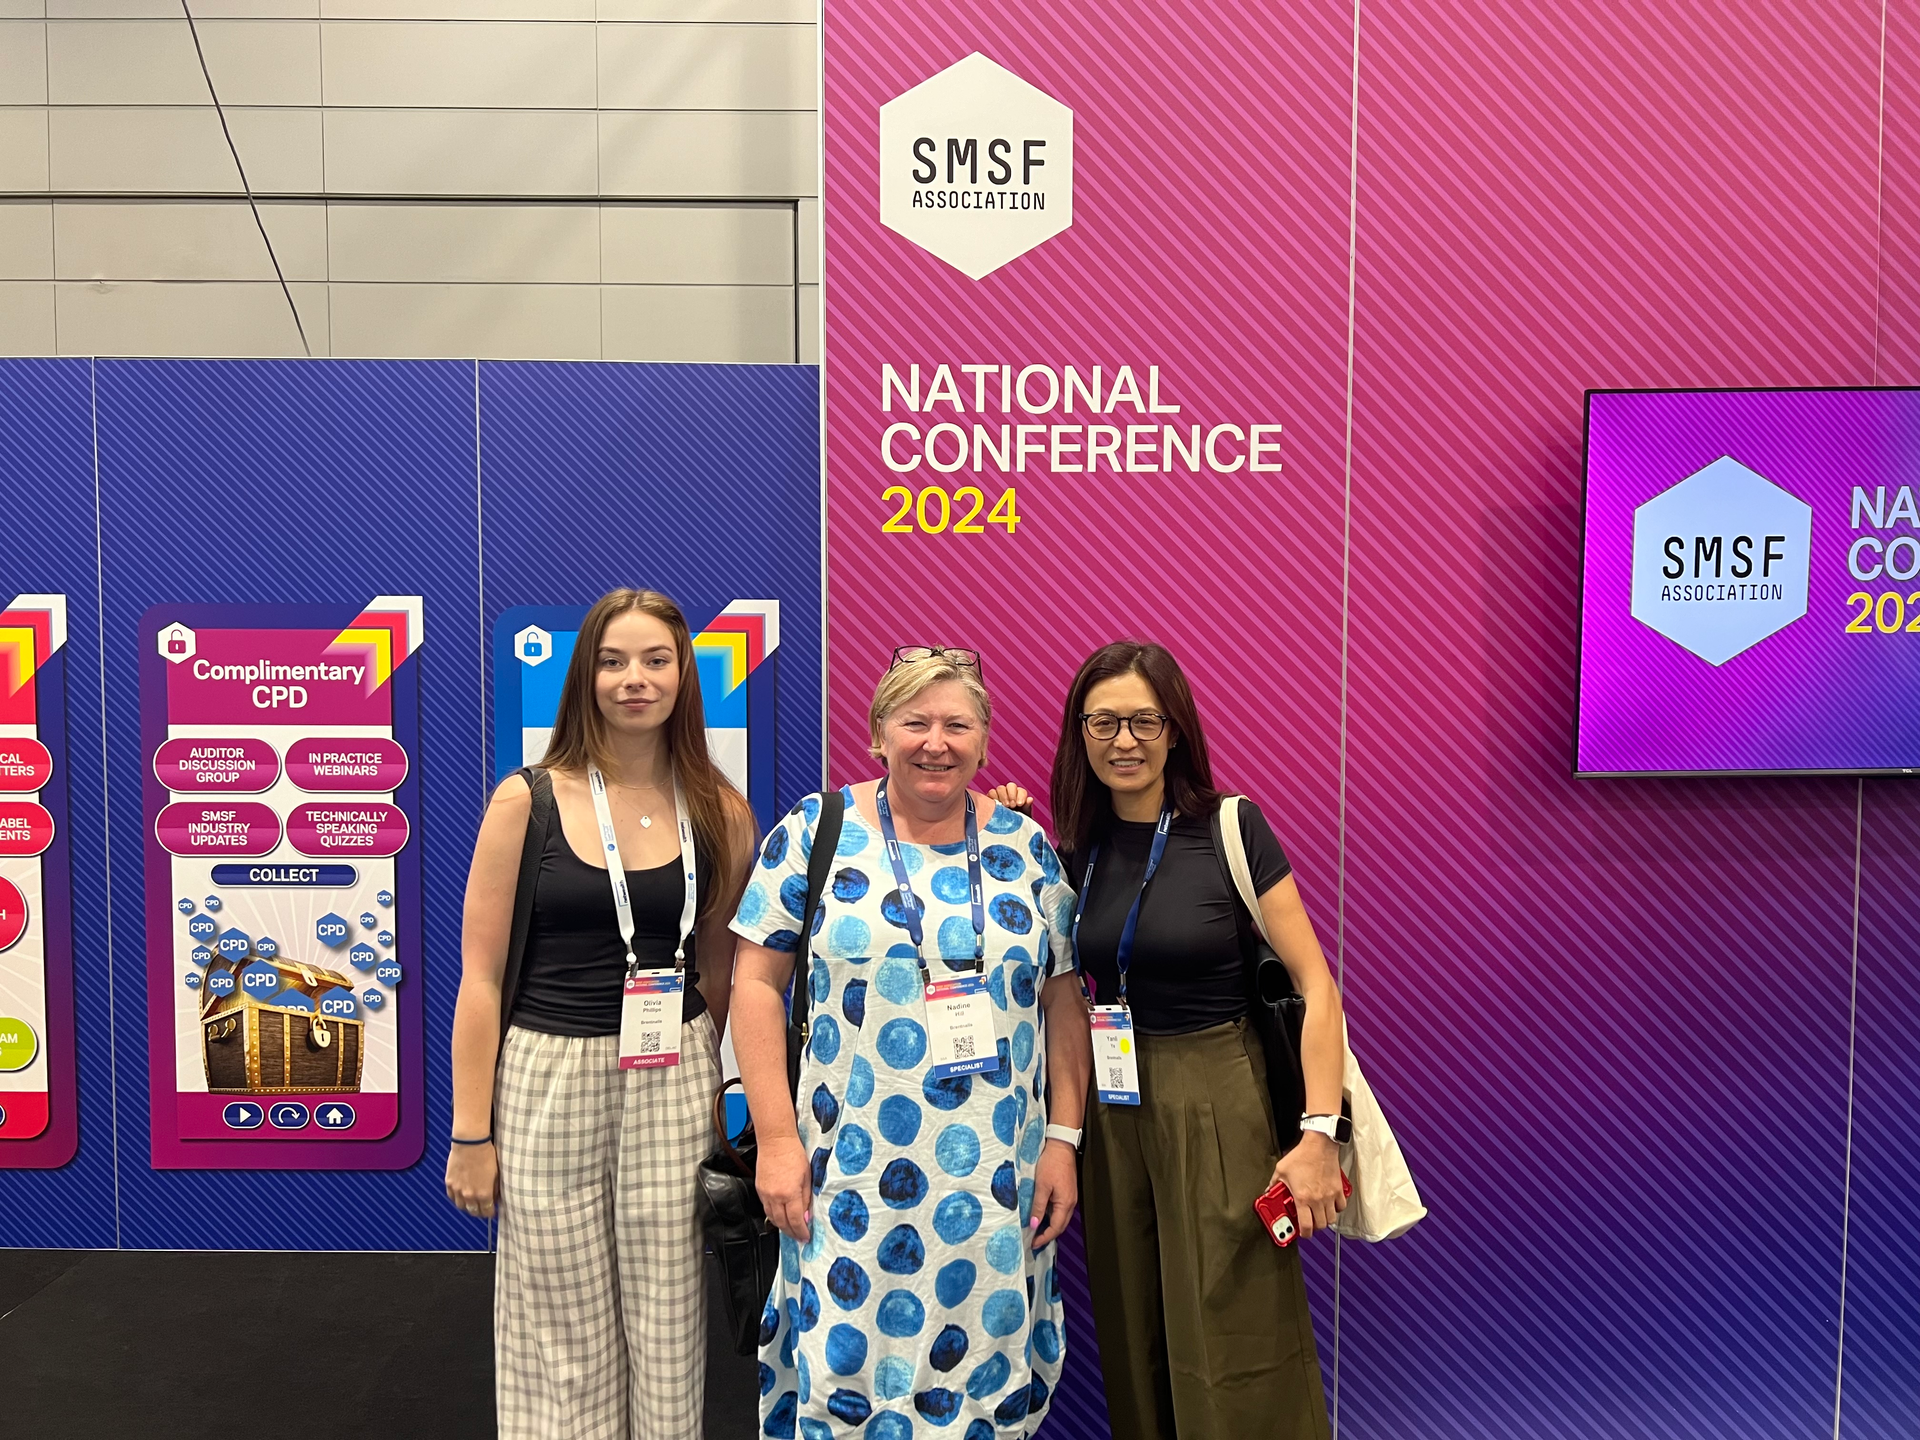 From left to right: Oliver Phillips, Intermediate Accountant, Nadine Hill, Principal and Yanli Ye, Manager recently attended the 2024 National Conference SMSF.
